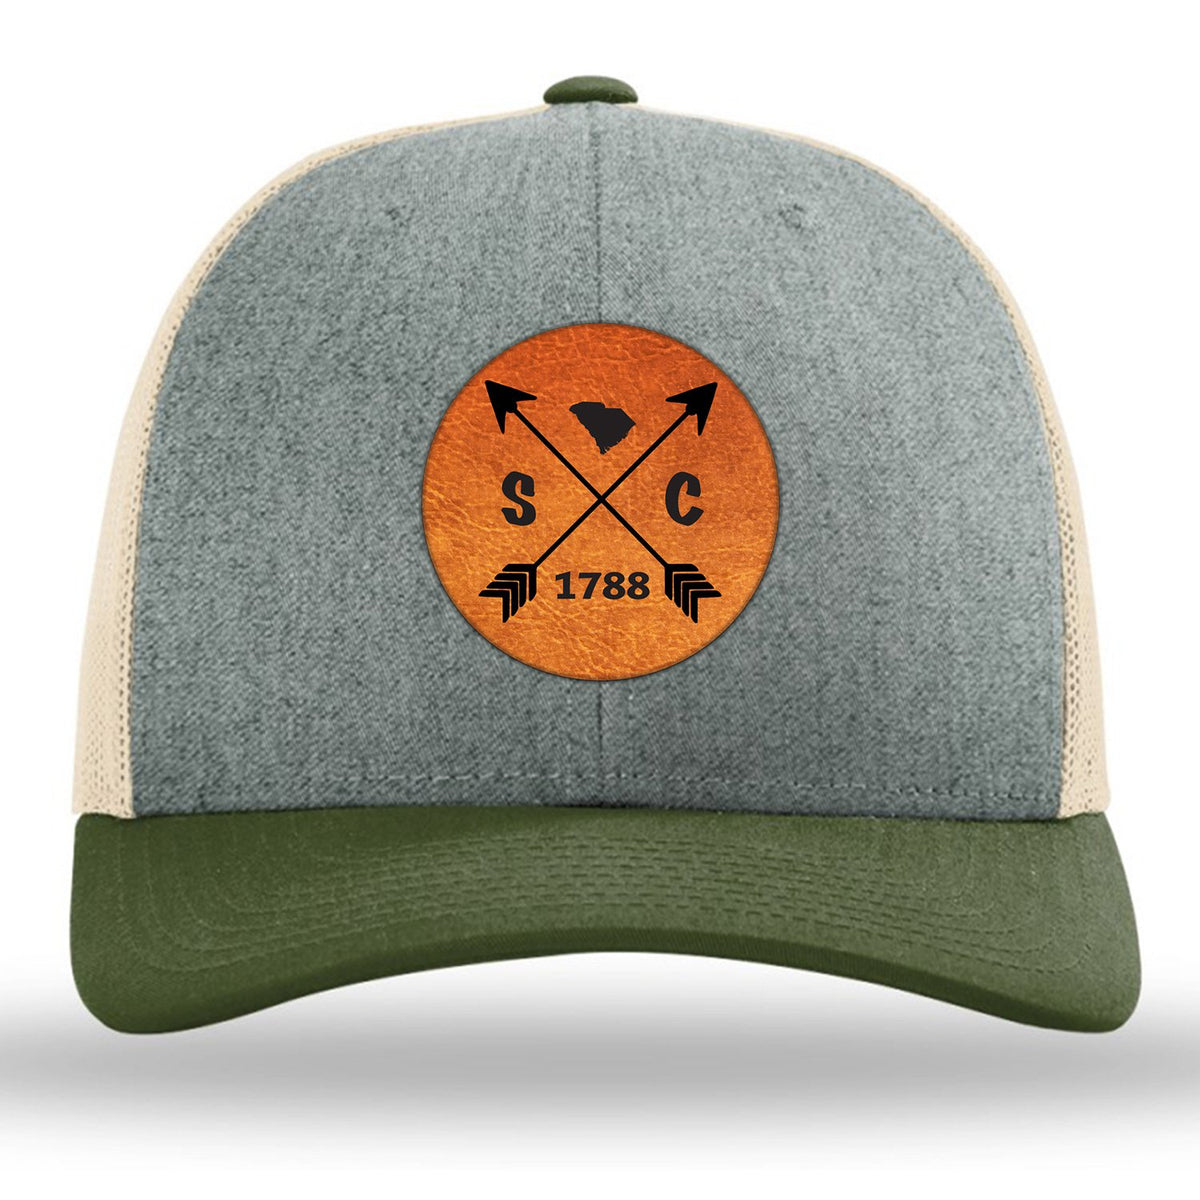 South Carolina State Arrows - Leather Patch Trucker Hat